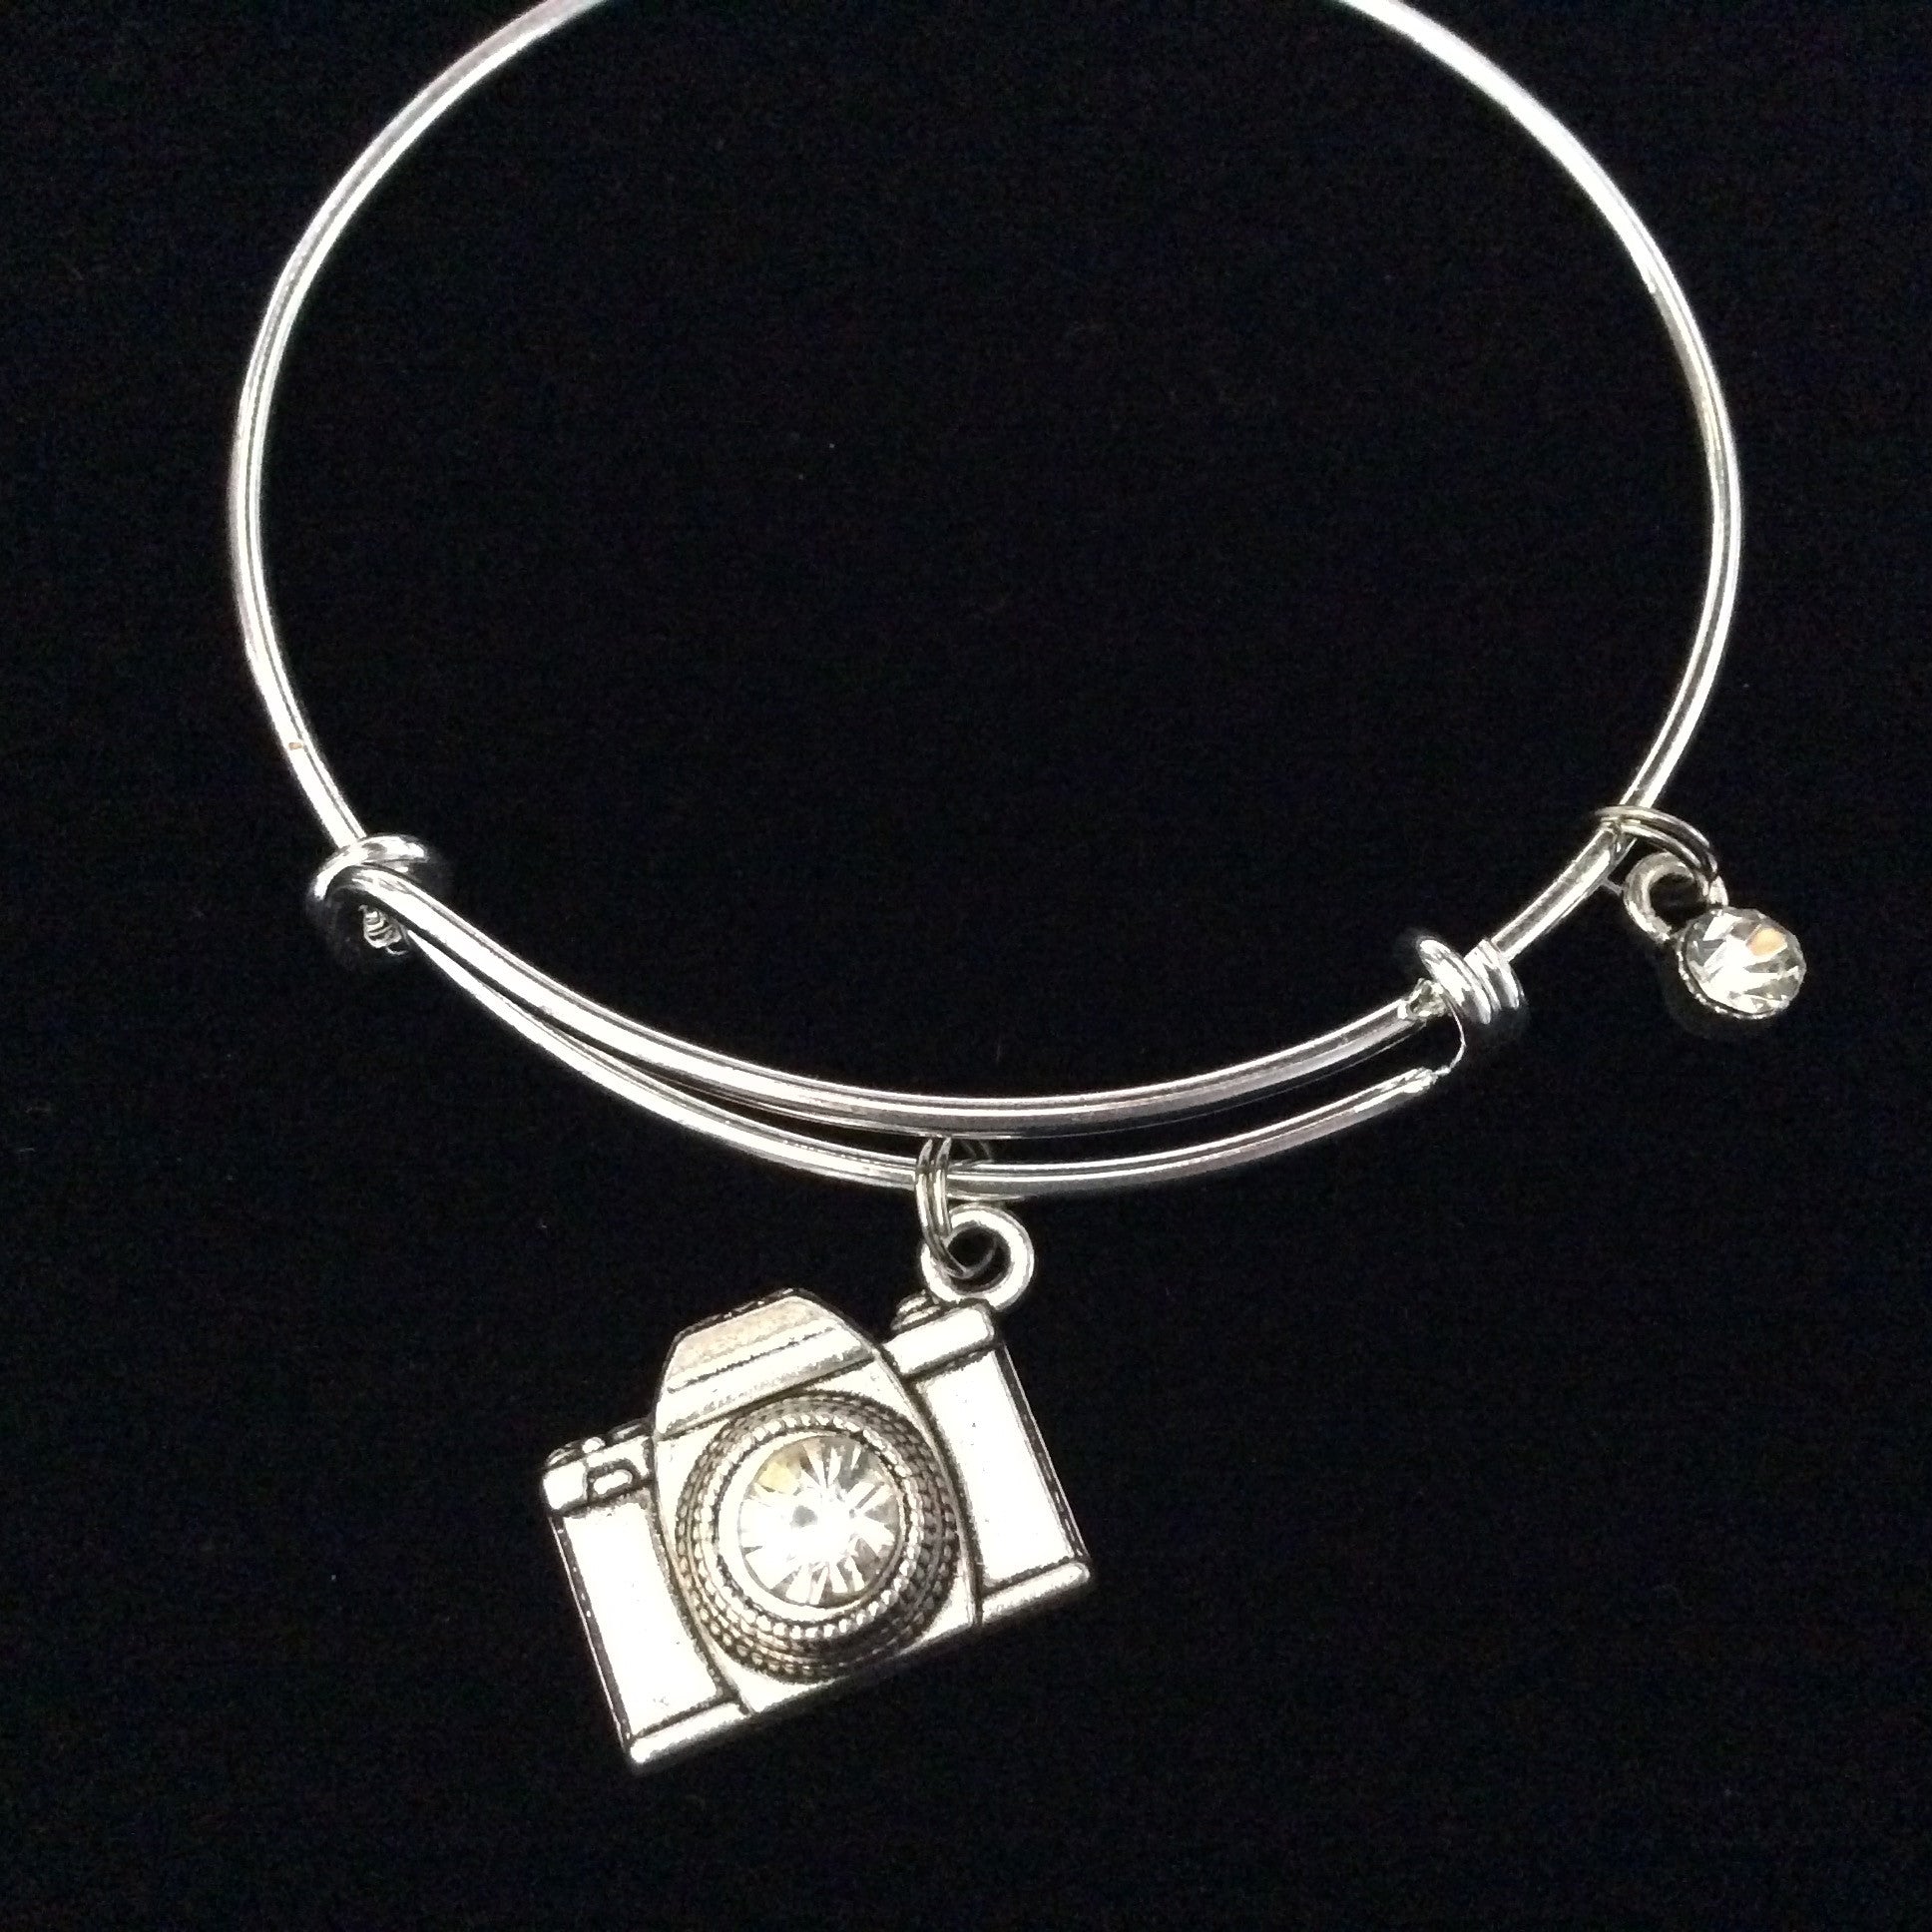 Pandora 925 Silver Charm Bracelet with 11 Charms Chicken Camera Daughter  Turtle | eBay